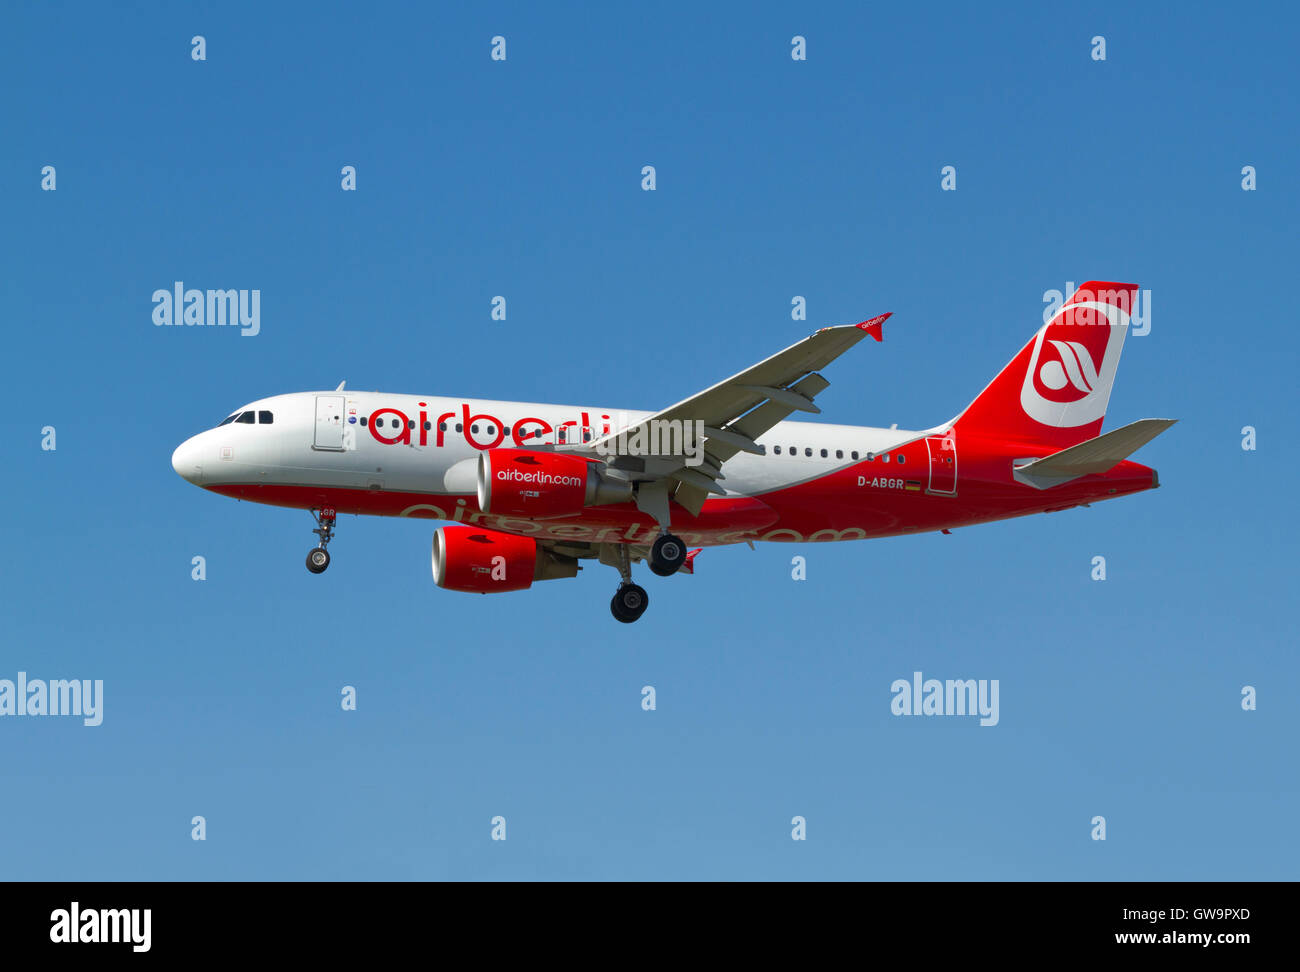 AirBerlin Airbus A319, D-ABGR, flight AB8034 from Berlin on final approach to runway 22L at Copenhagen Airport, CPH, Kastrup Stock Photo